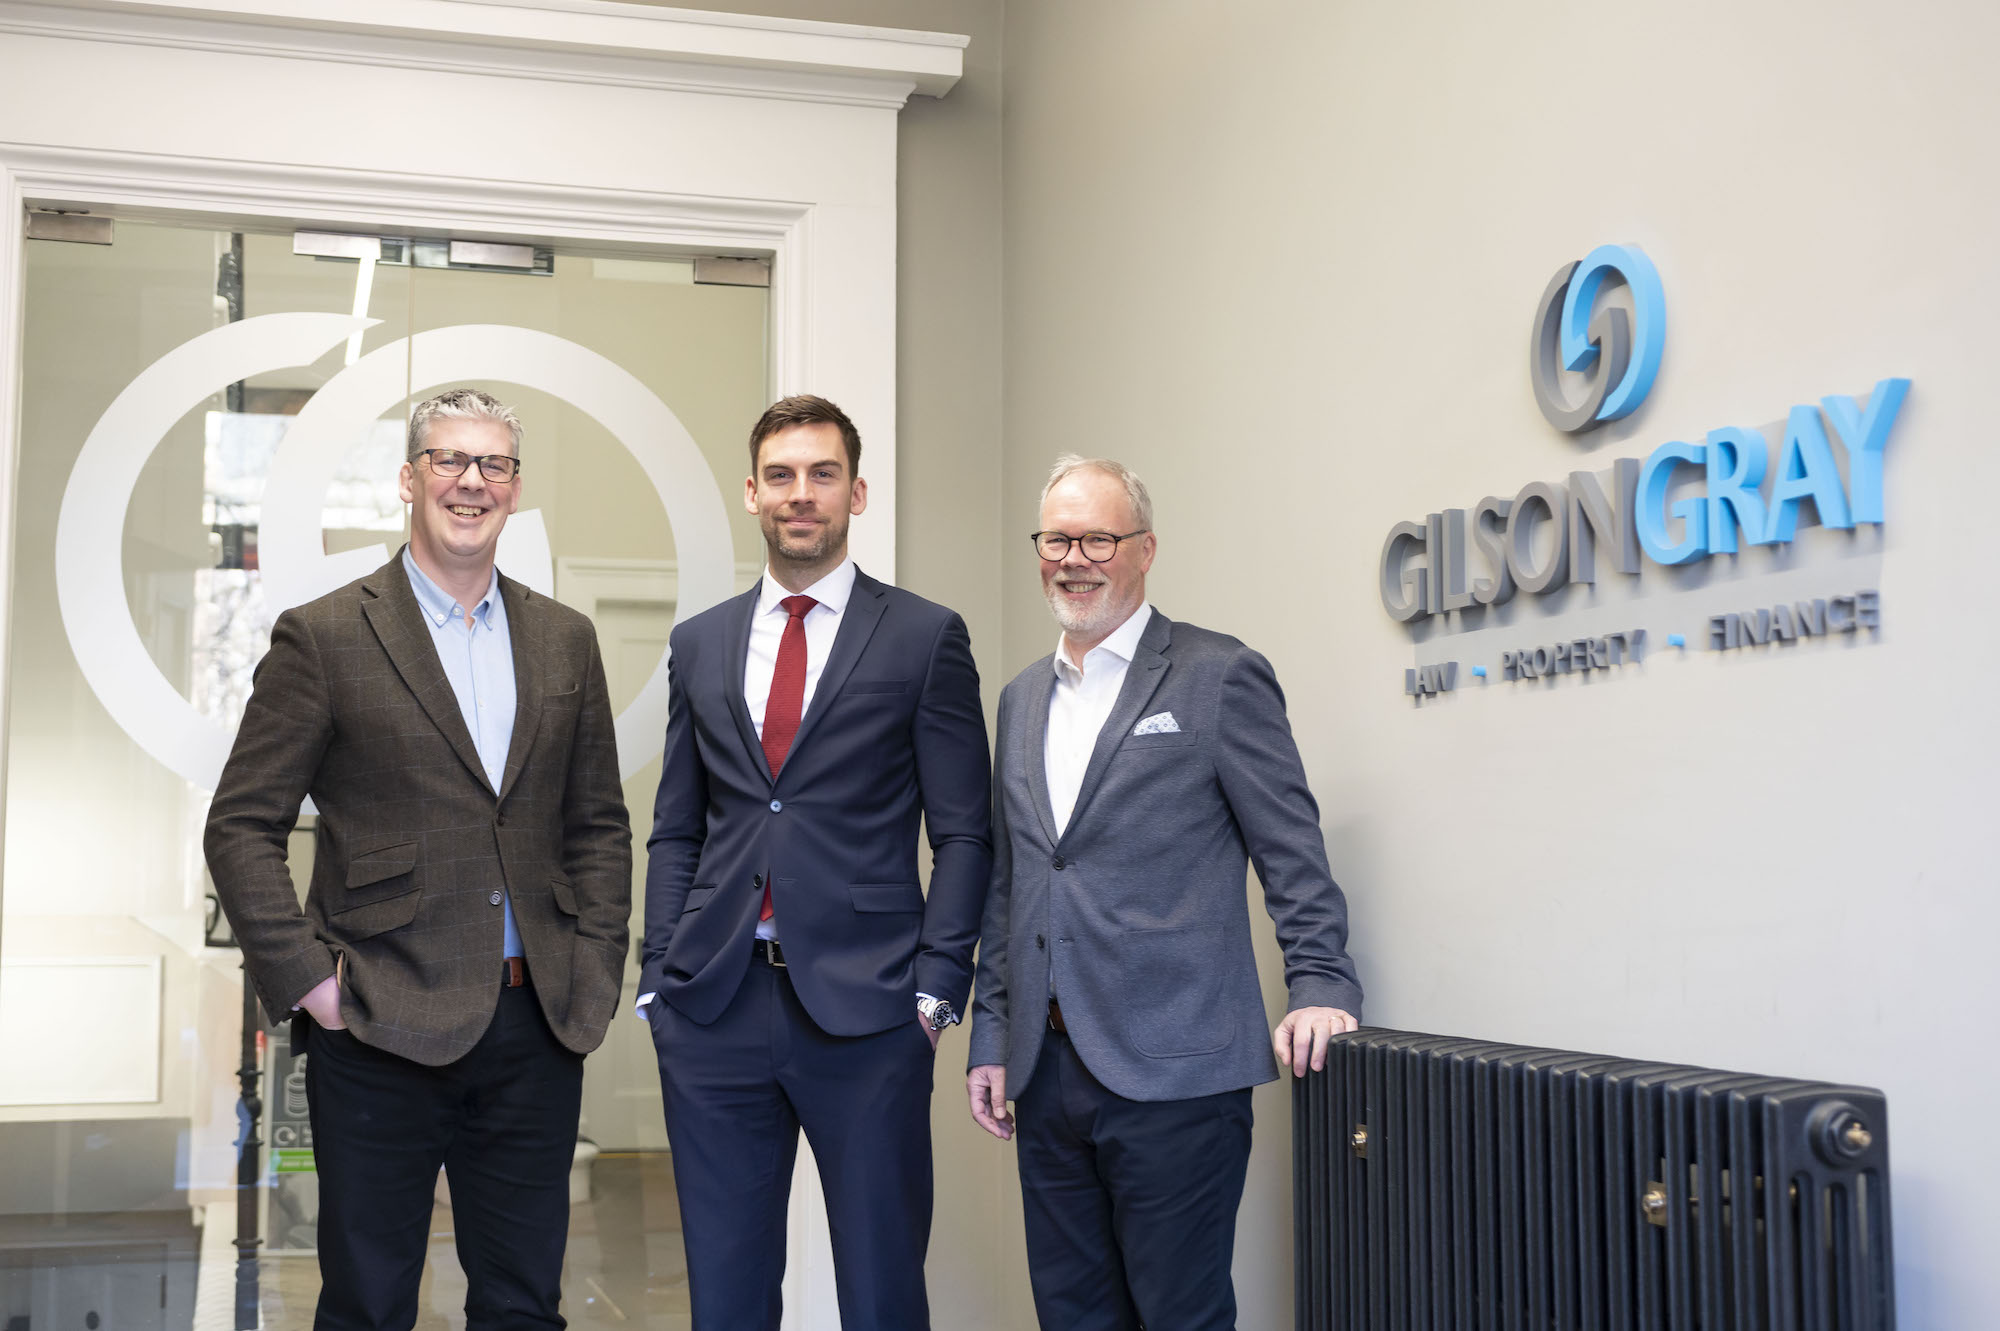 Gilson Gray Financial Management acquires Wilson Financial